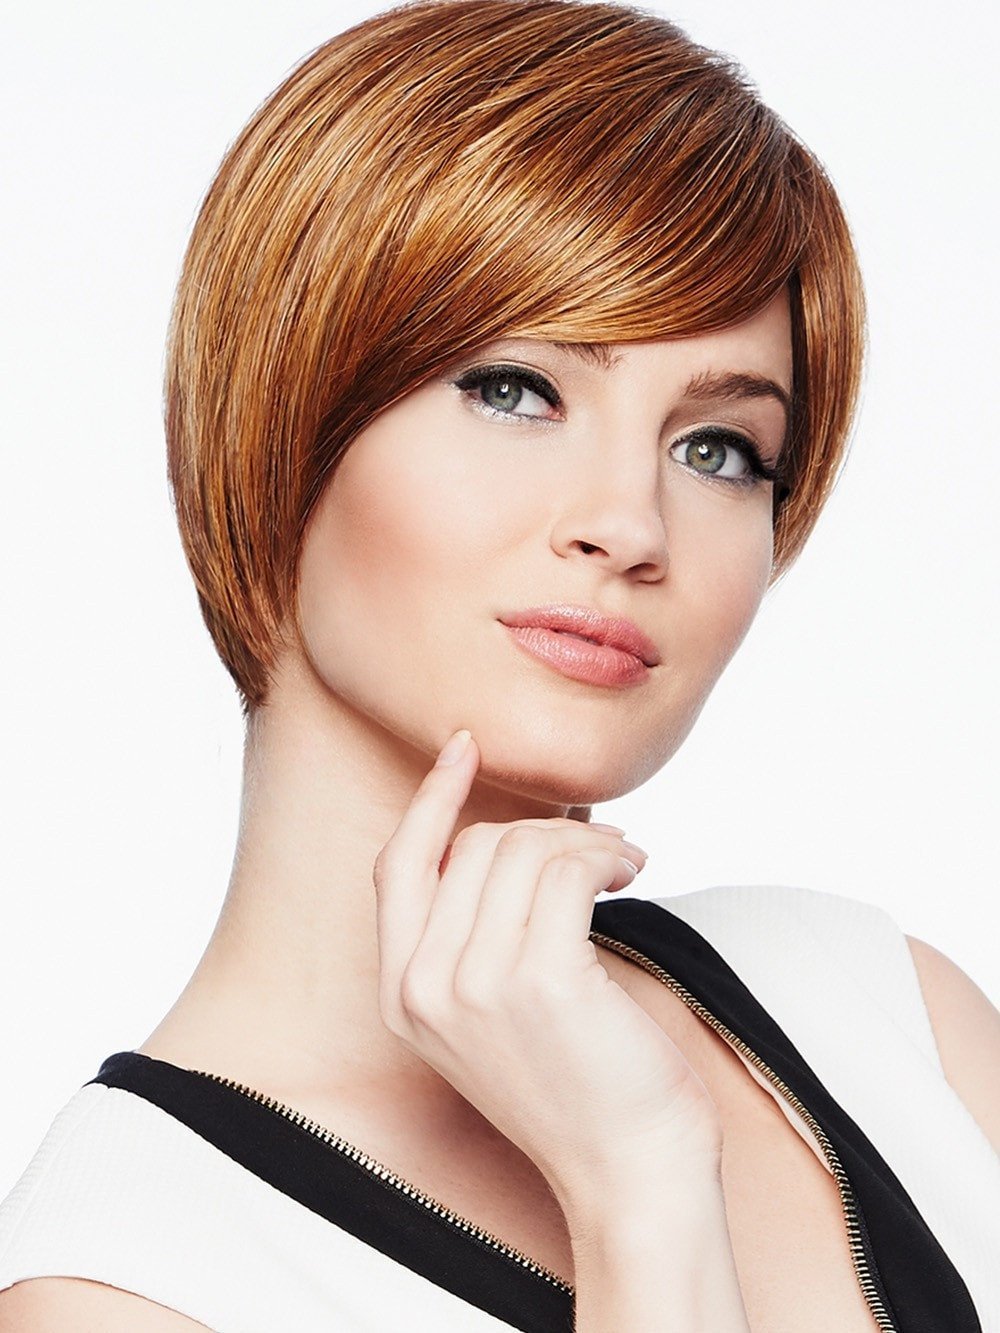 This contemporary salon trend is short and offers an asymmetrical cut